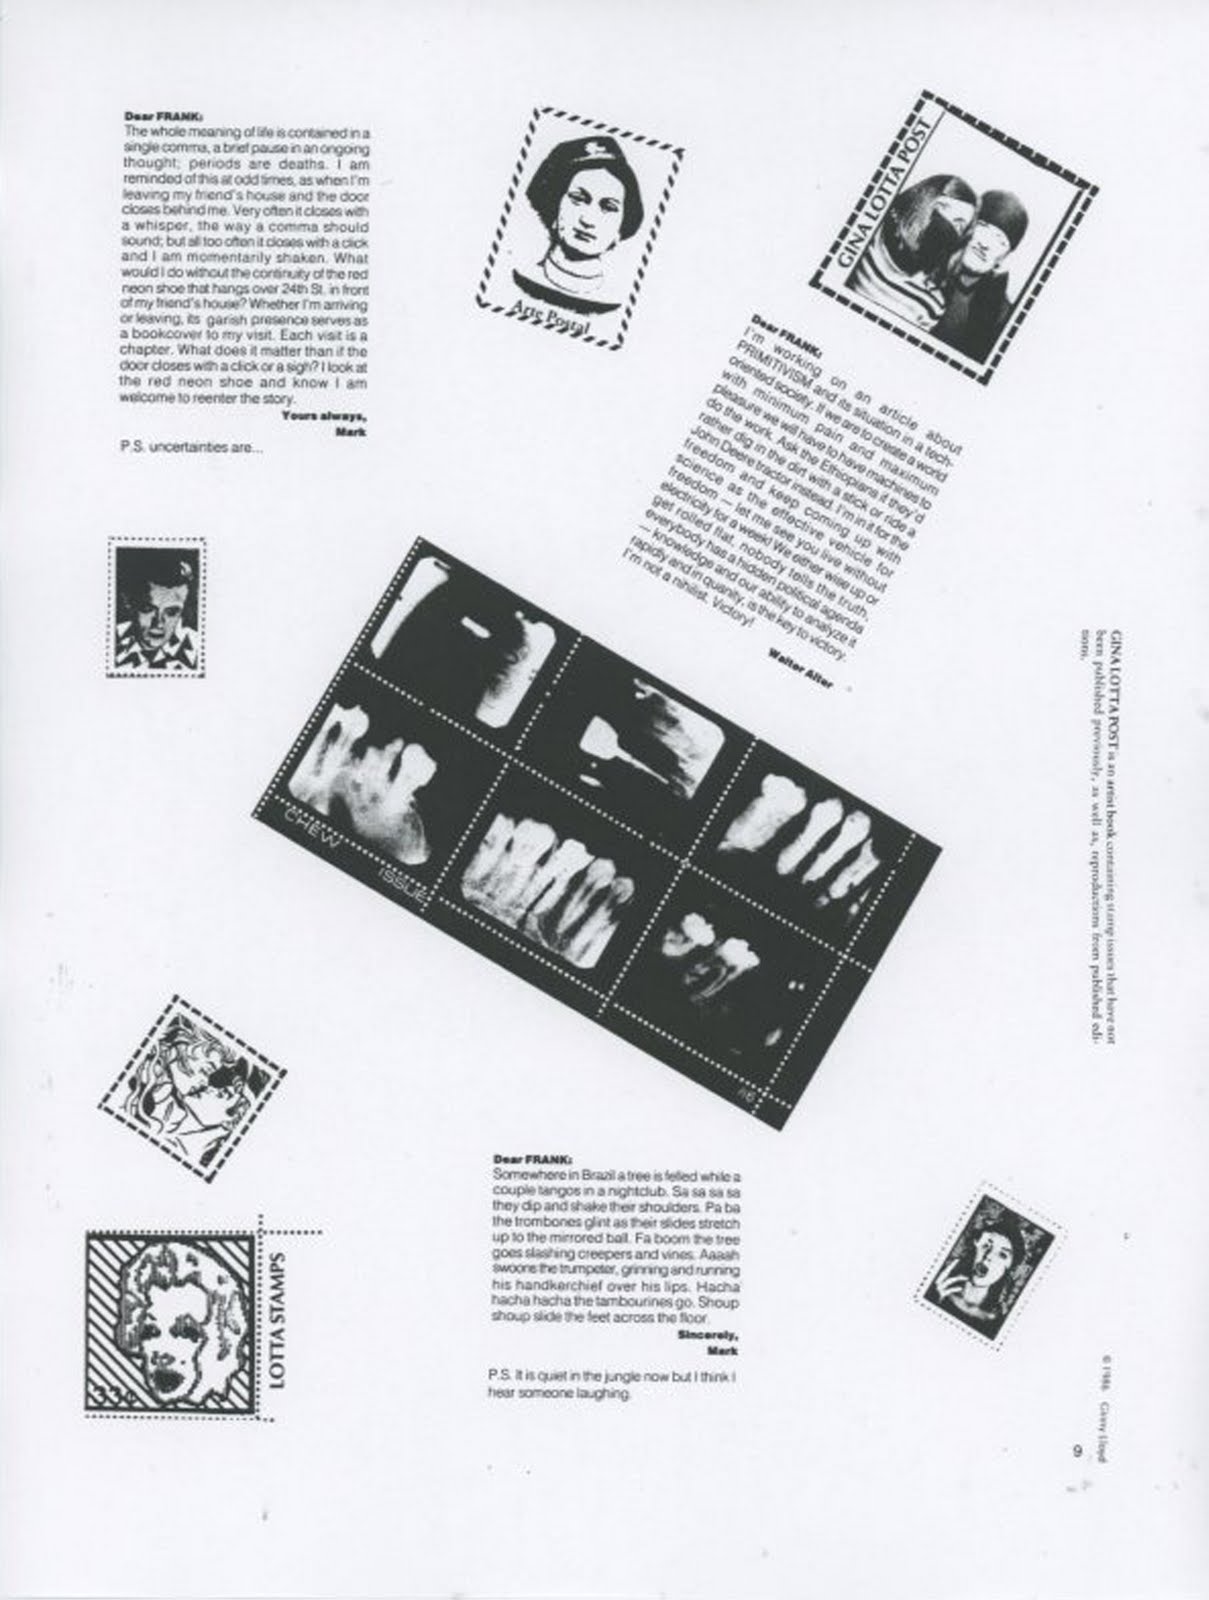 Behind the Scene: Artistamps in Frank Magazine #9 - 1986